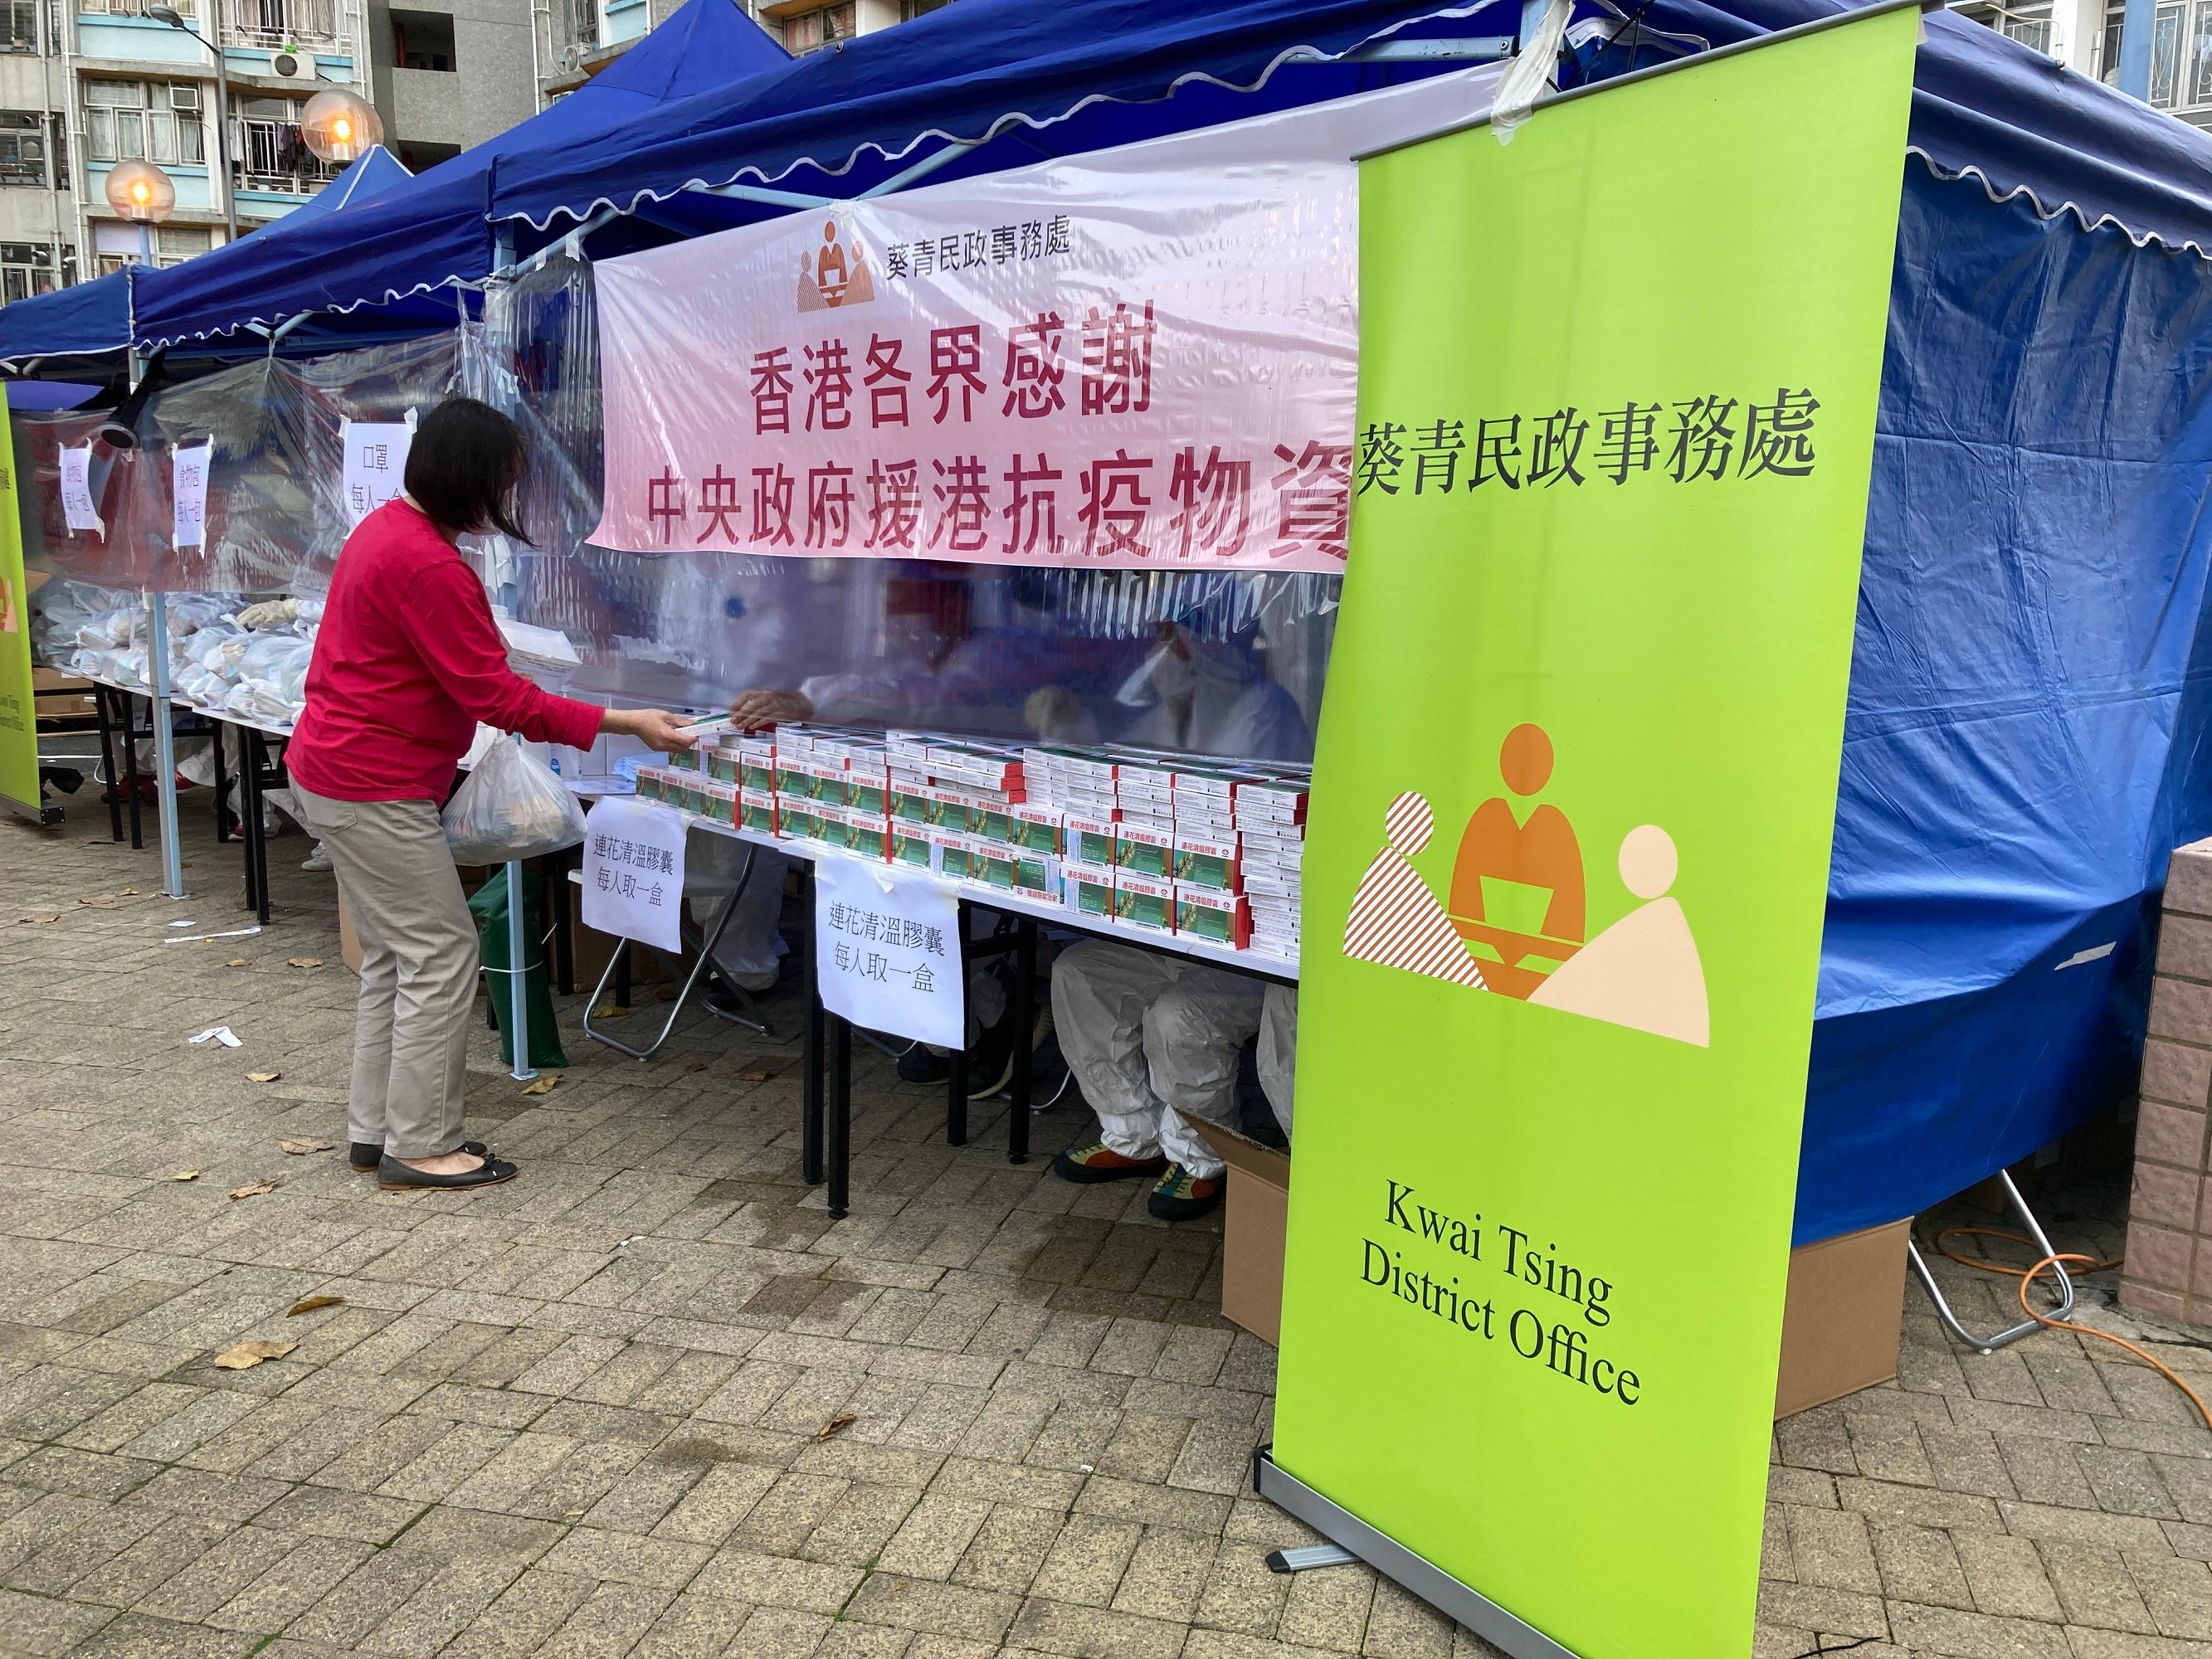 The Government yesterday (March 15) made a "restriction-testing declaration" and issued a compulsory testing notice in respect of the specified "restricted area" in Tsing Yi (i.e. Hang Chun House, Cheung Hang Estate, Tsing Yi, excluding elderly centre on G/F), under which people within the specified "restricted area" in Tsing Yi were required to stay in their premises and undergo compulsory testing. Photo shows the staff distributing anti-epidemic proprietary Chinese medicines supplied by the Central People's Government to a person subject to compulsory testing in the "restricted area".